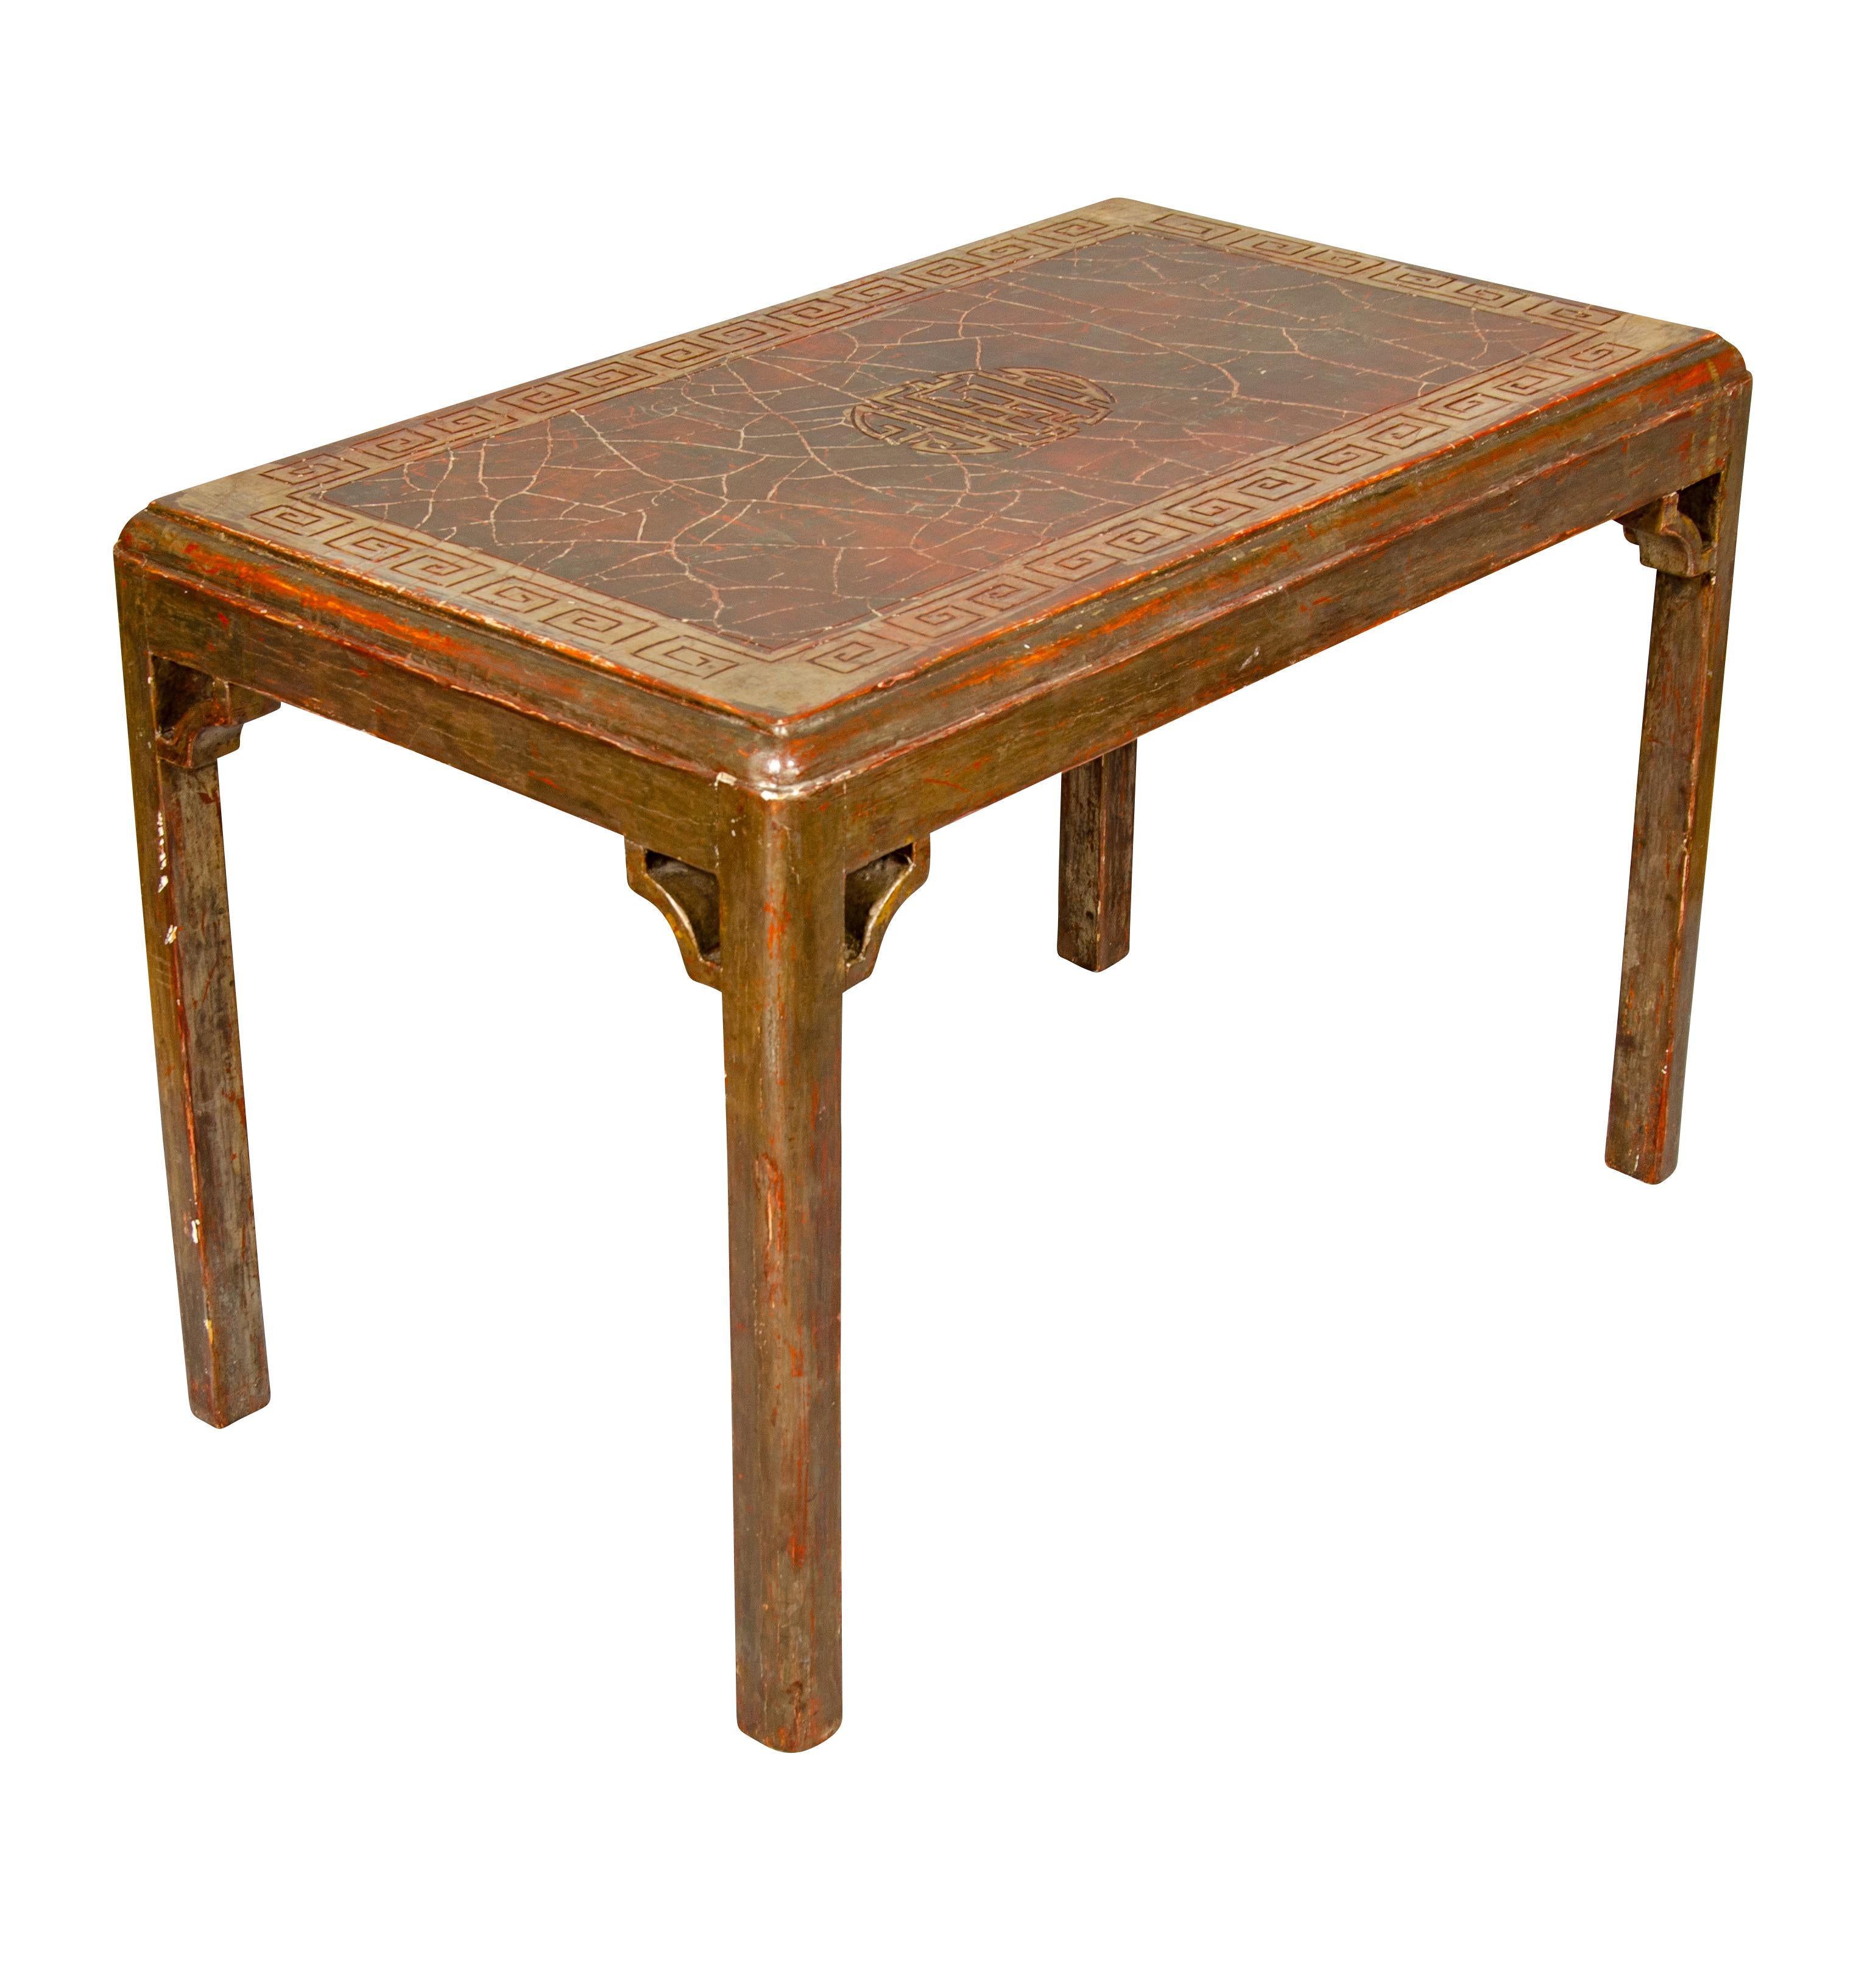 Silvered Wood Table Attributed To Max Kuehne In Good Condition For Sale In Essex, MA